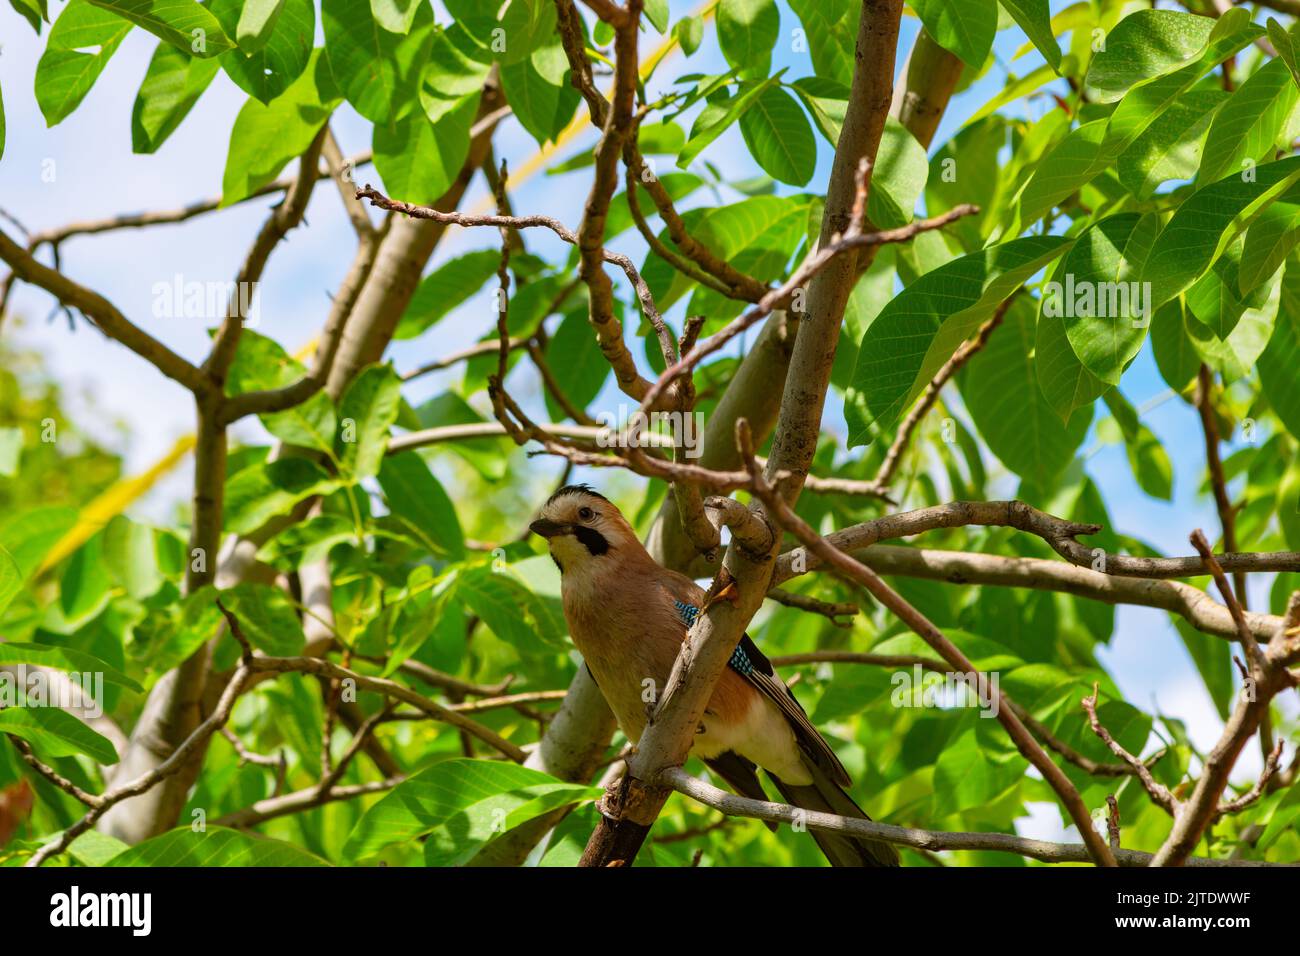 Portrait of a jay perched on the branch. Ornithology background photo. Stock Photo